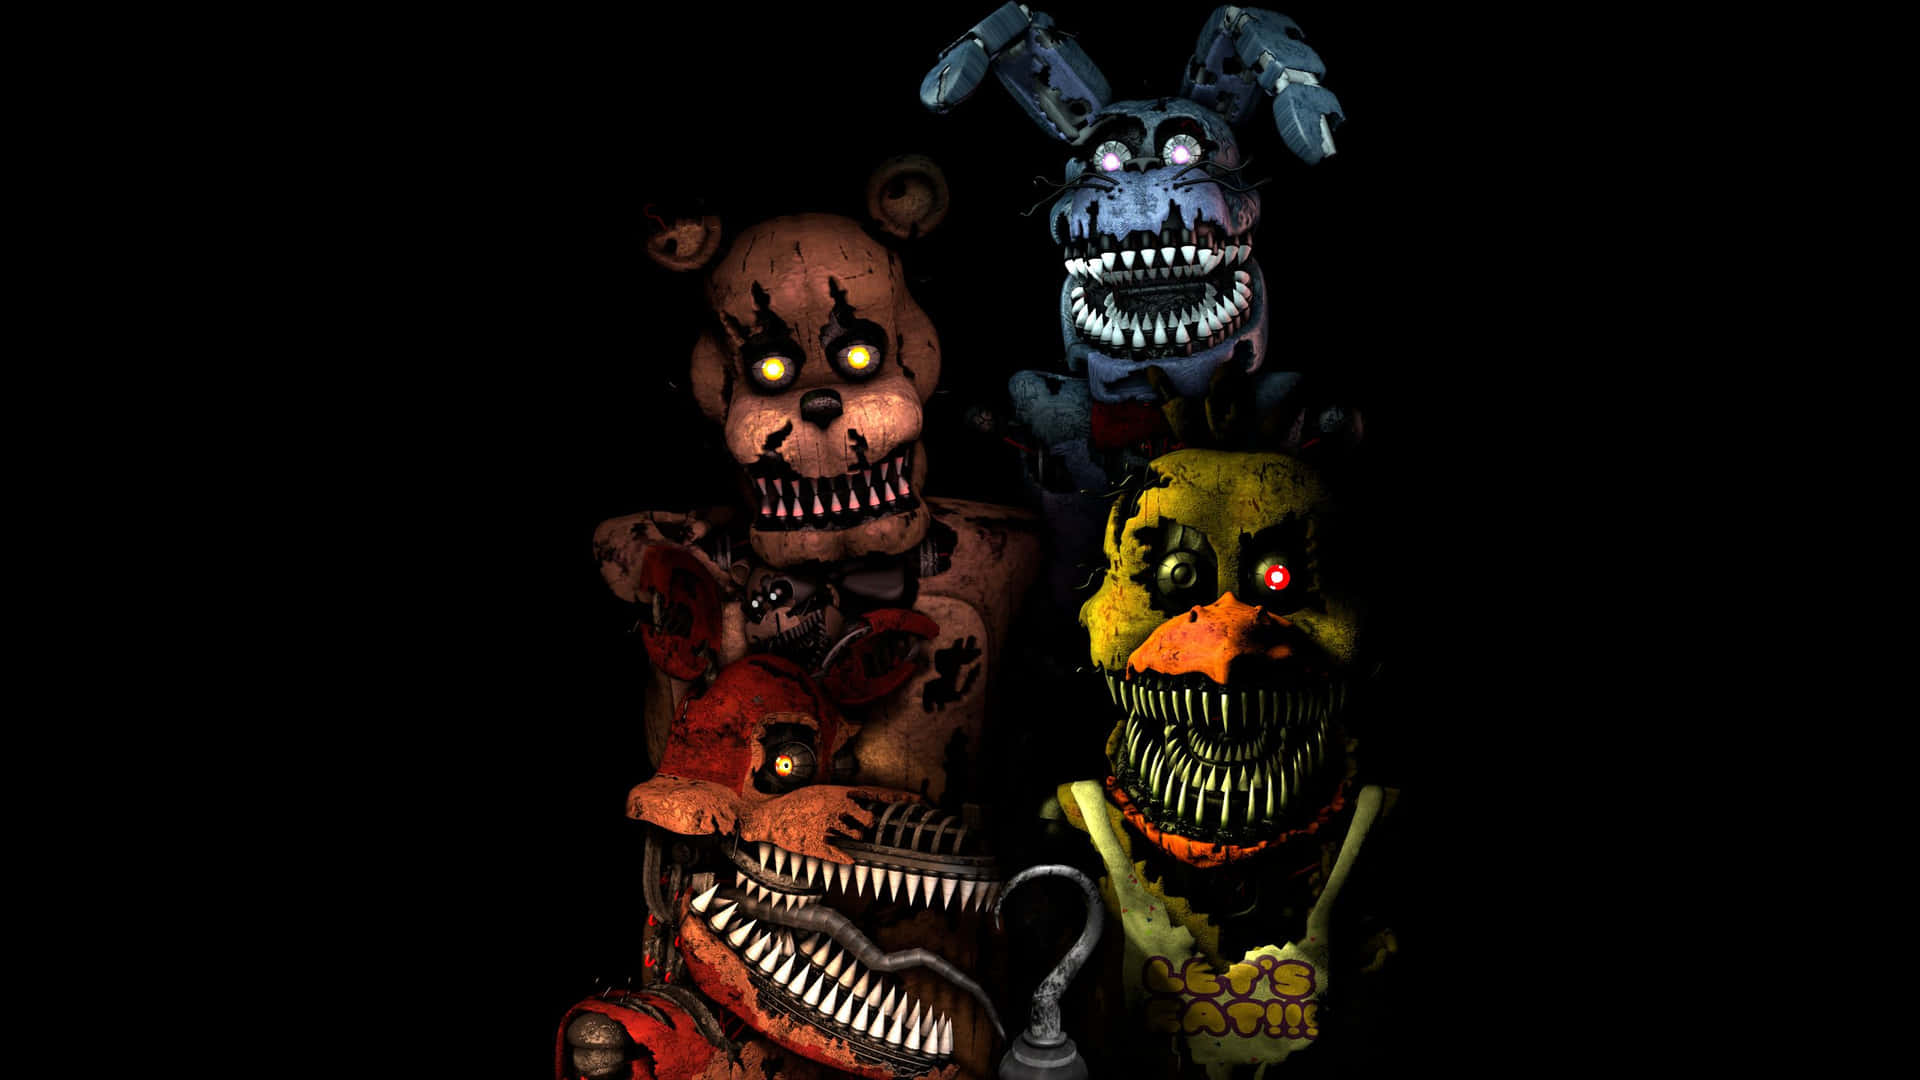 Spooky Night at Freddy's - FNAF Characters in Action Wallpaper